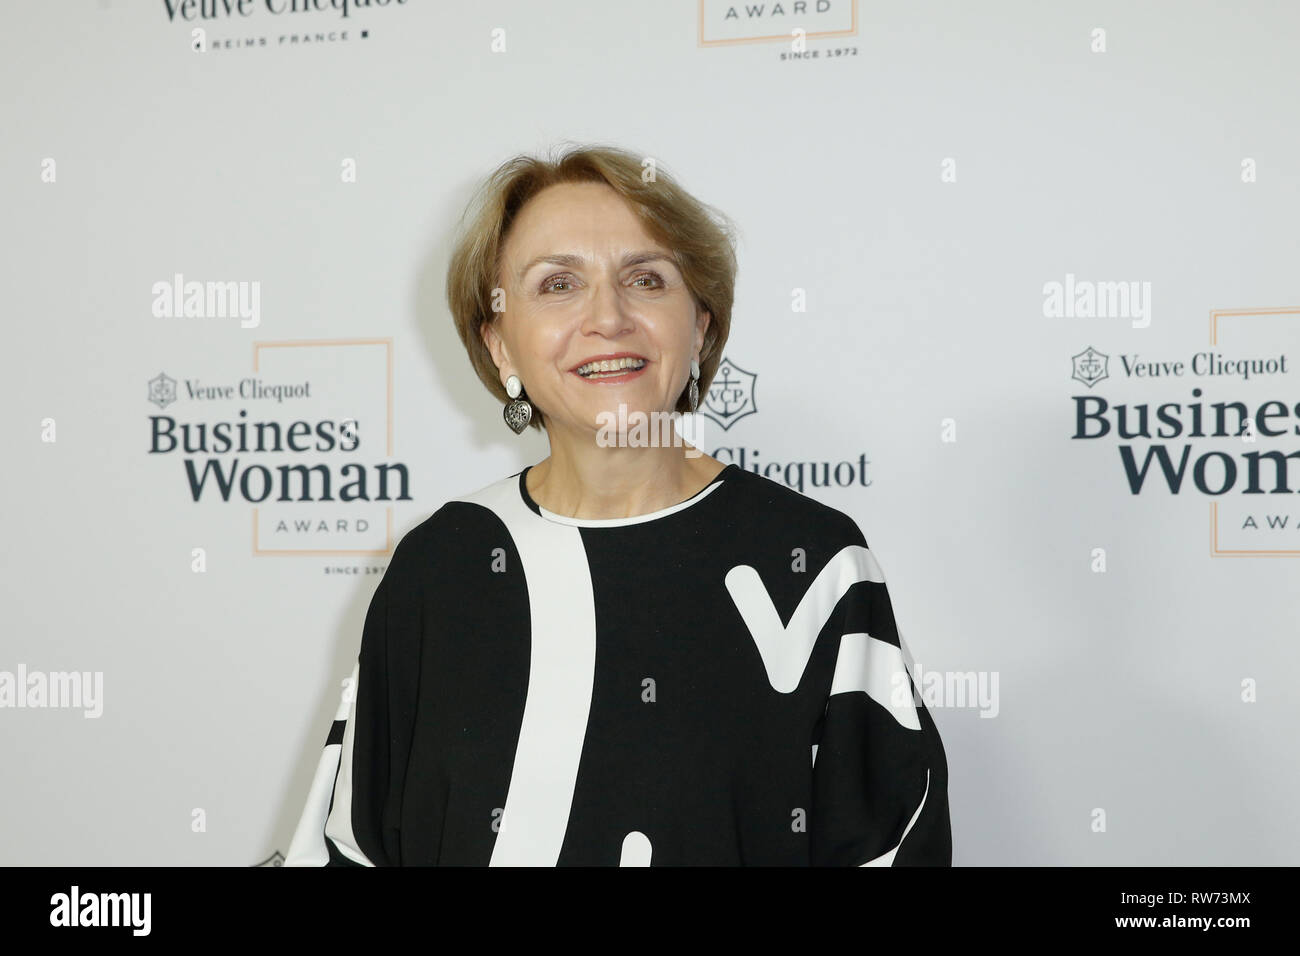 Veuve Clicquot Business Woman Award 2017 at The Grand in Berlin